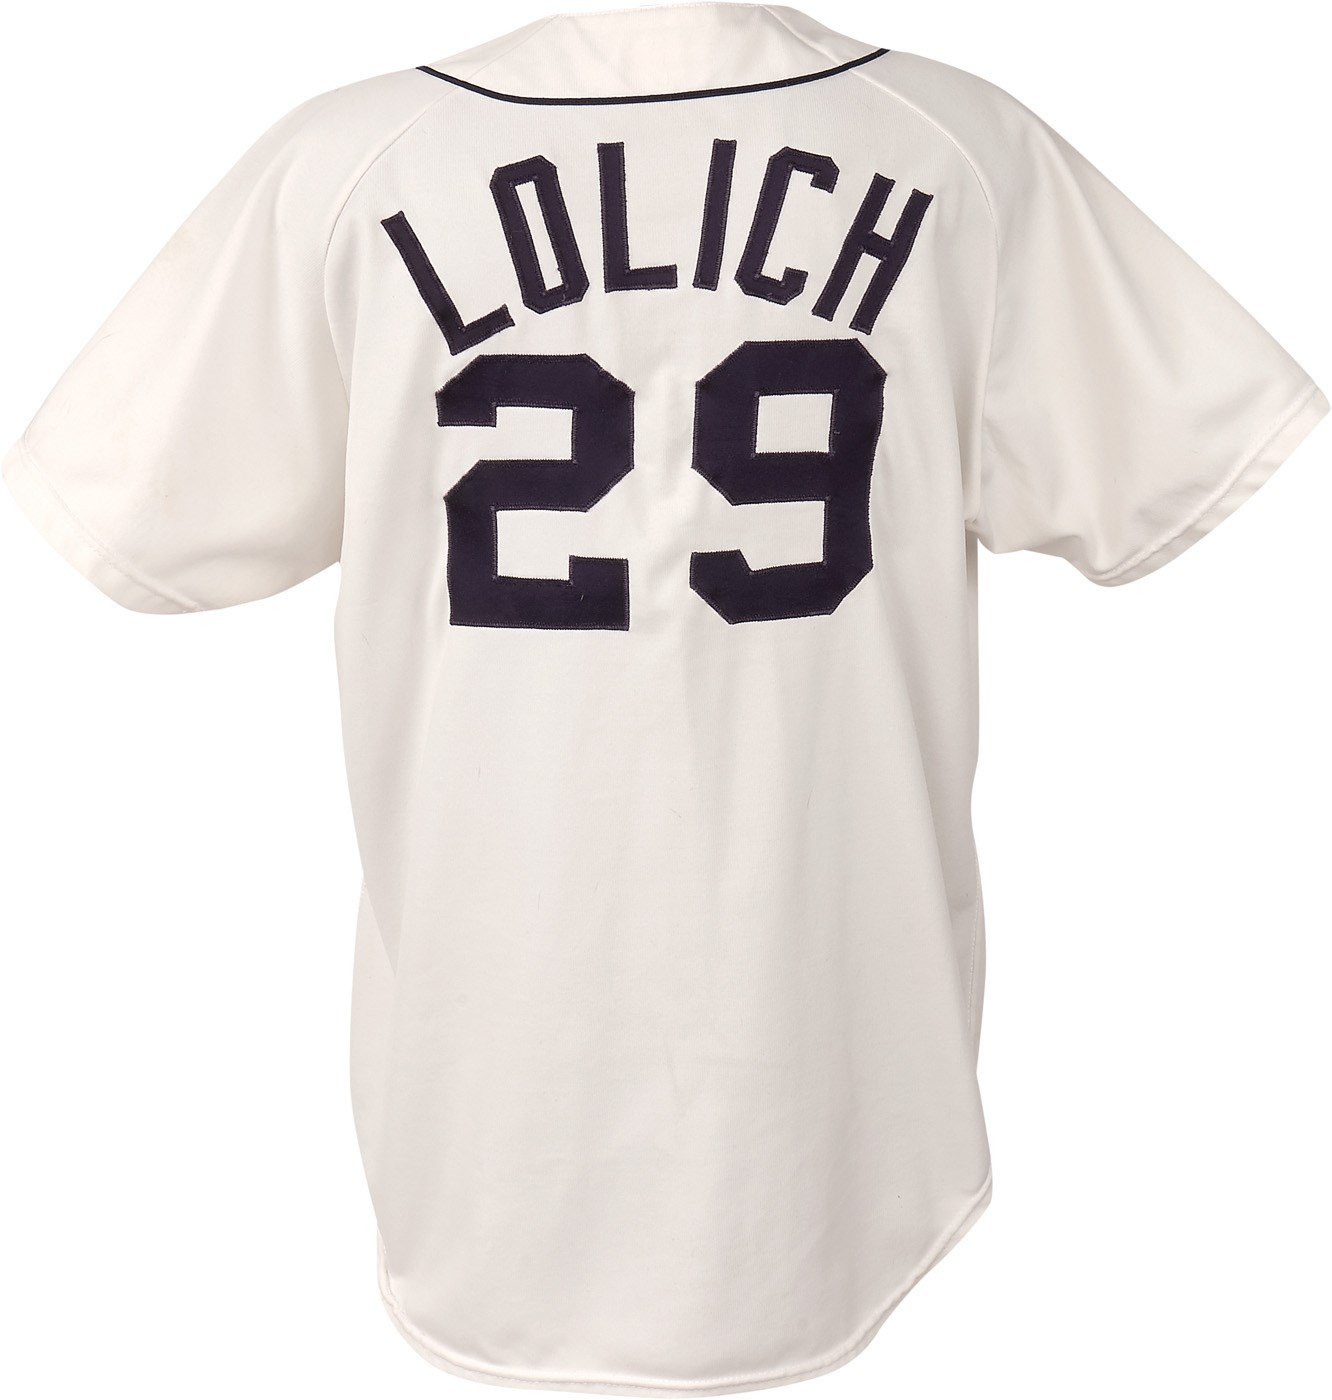 Baseball Equipment - 1975 Mickey Lolich Detroit Tigers Game Worn Jersey from Swan Song